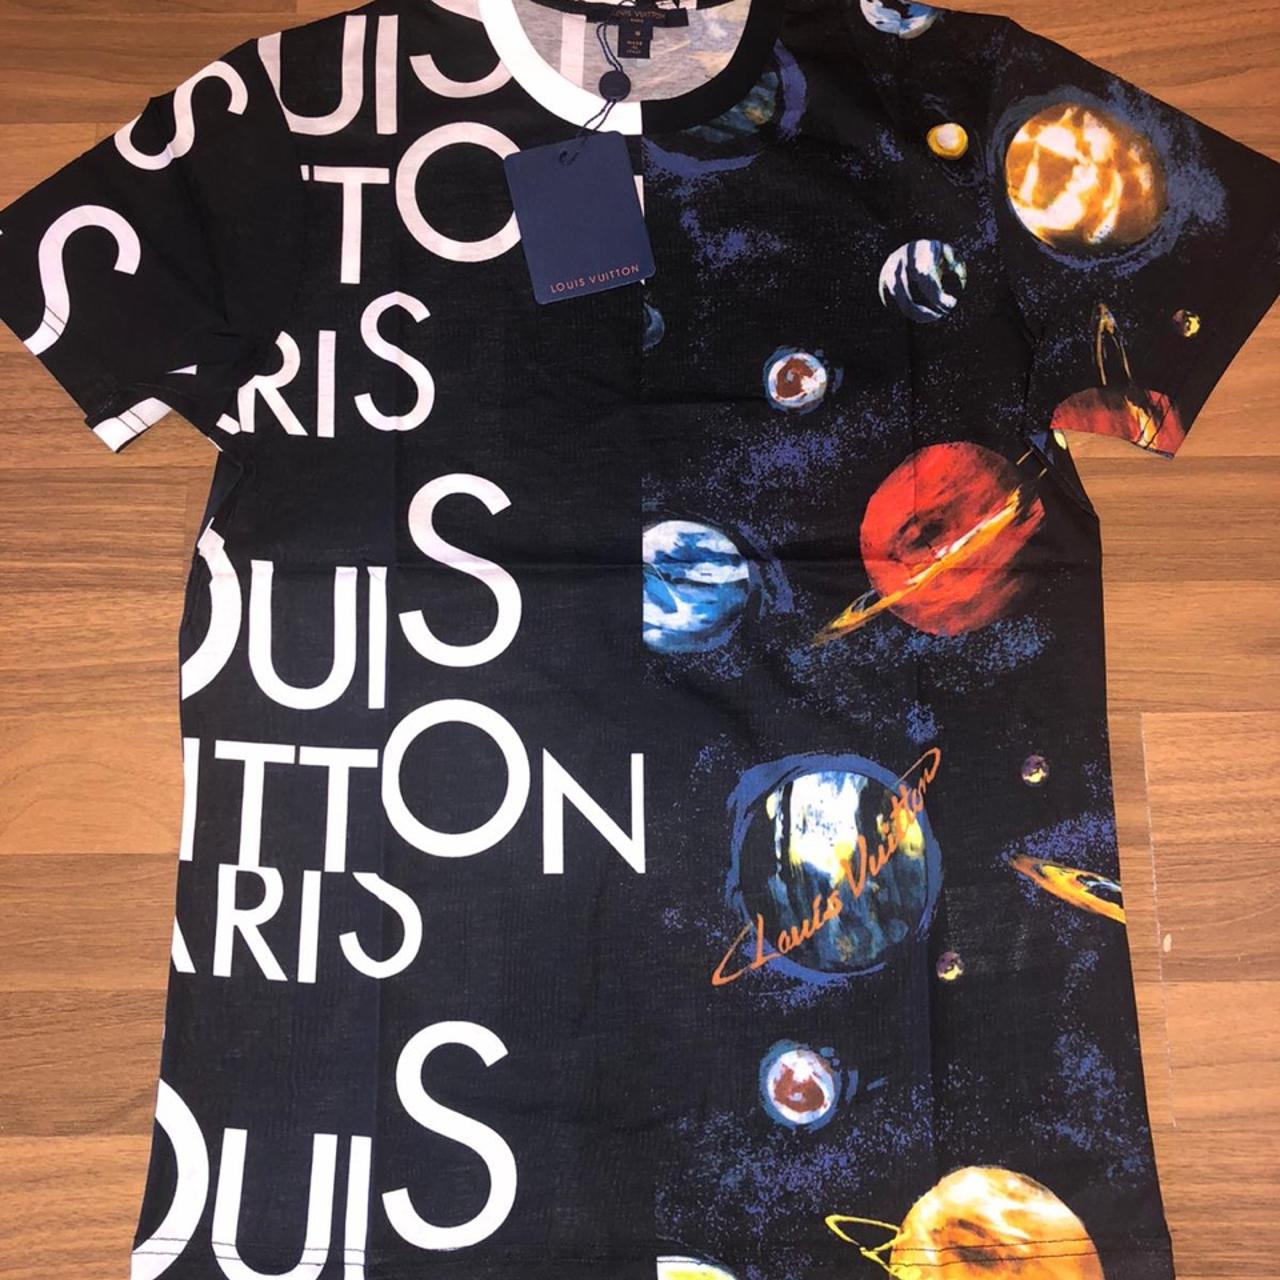 Louis Vuitton Half and Half Galaxy T-Shirt available